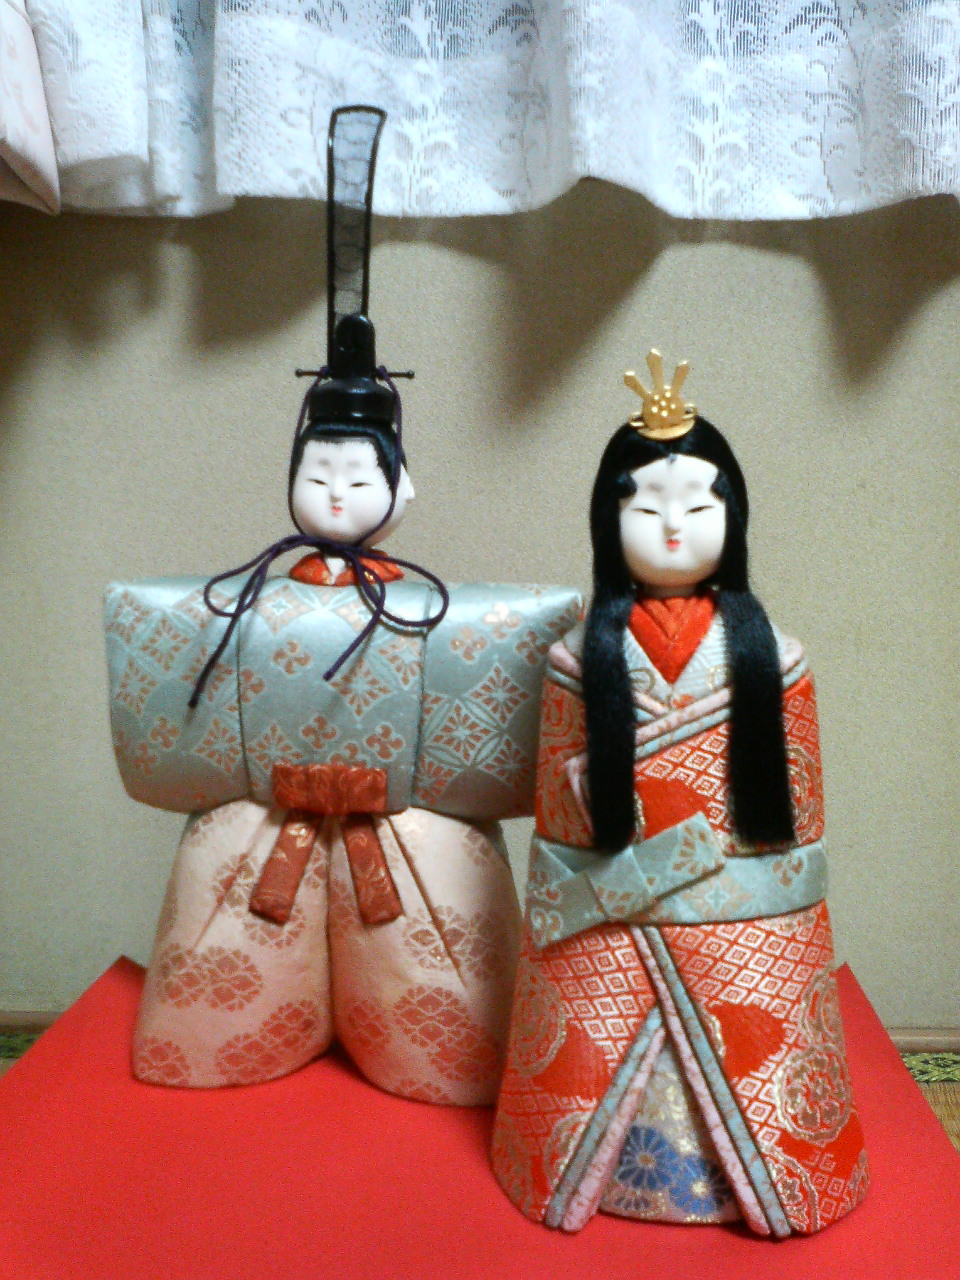 Dolls pasted cloth on wood carvings